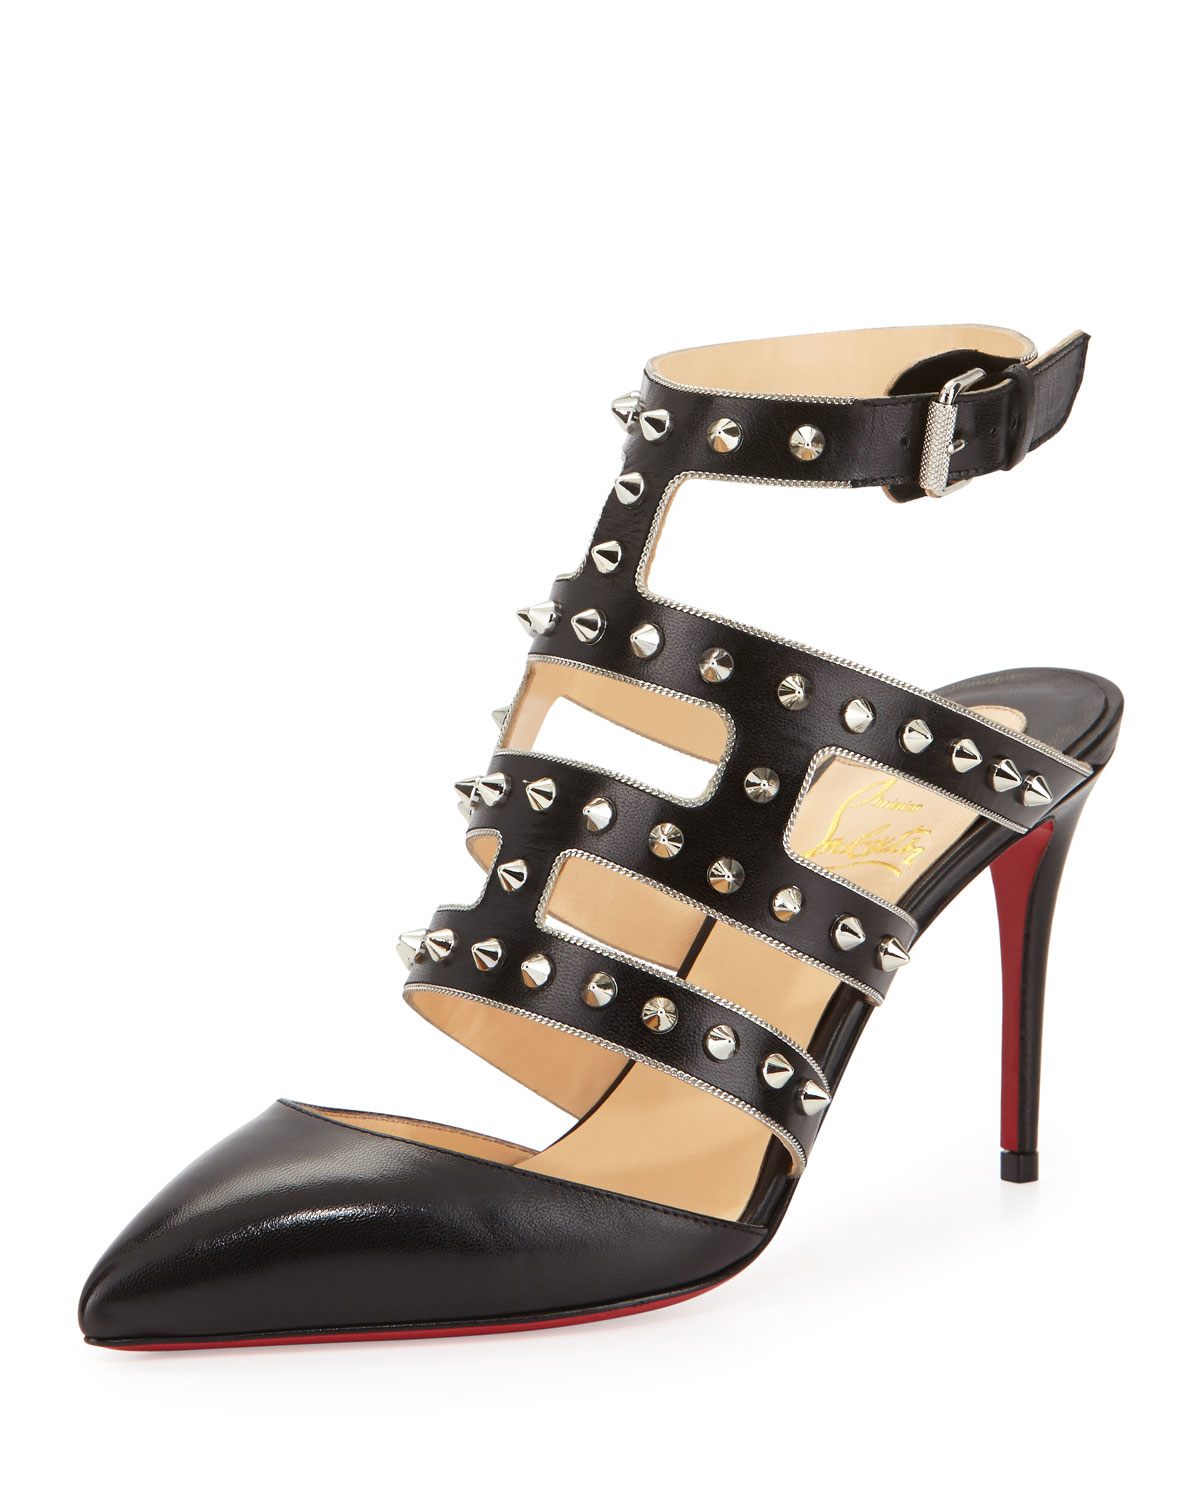 Lyst - Christian Louboutin Tchikaboum Studded Leather Cage Pumps in Black